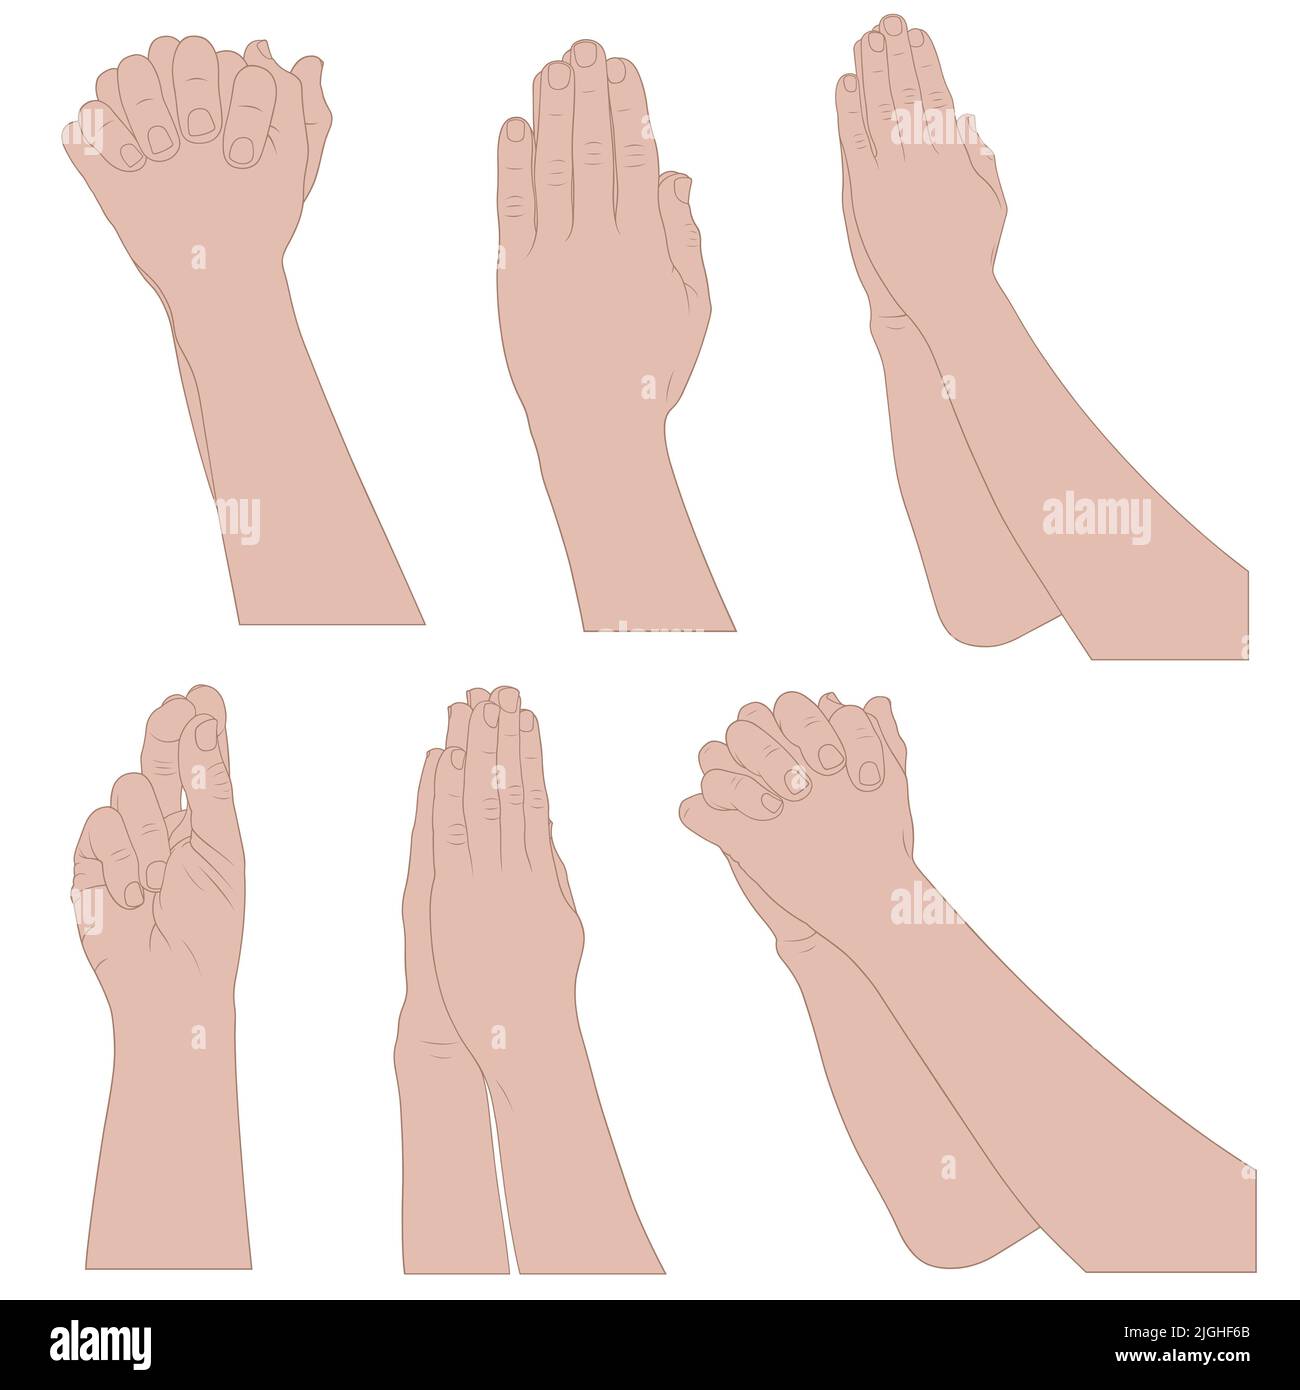 Illustration of different praying hands isolated on white Stock Photo